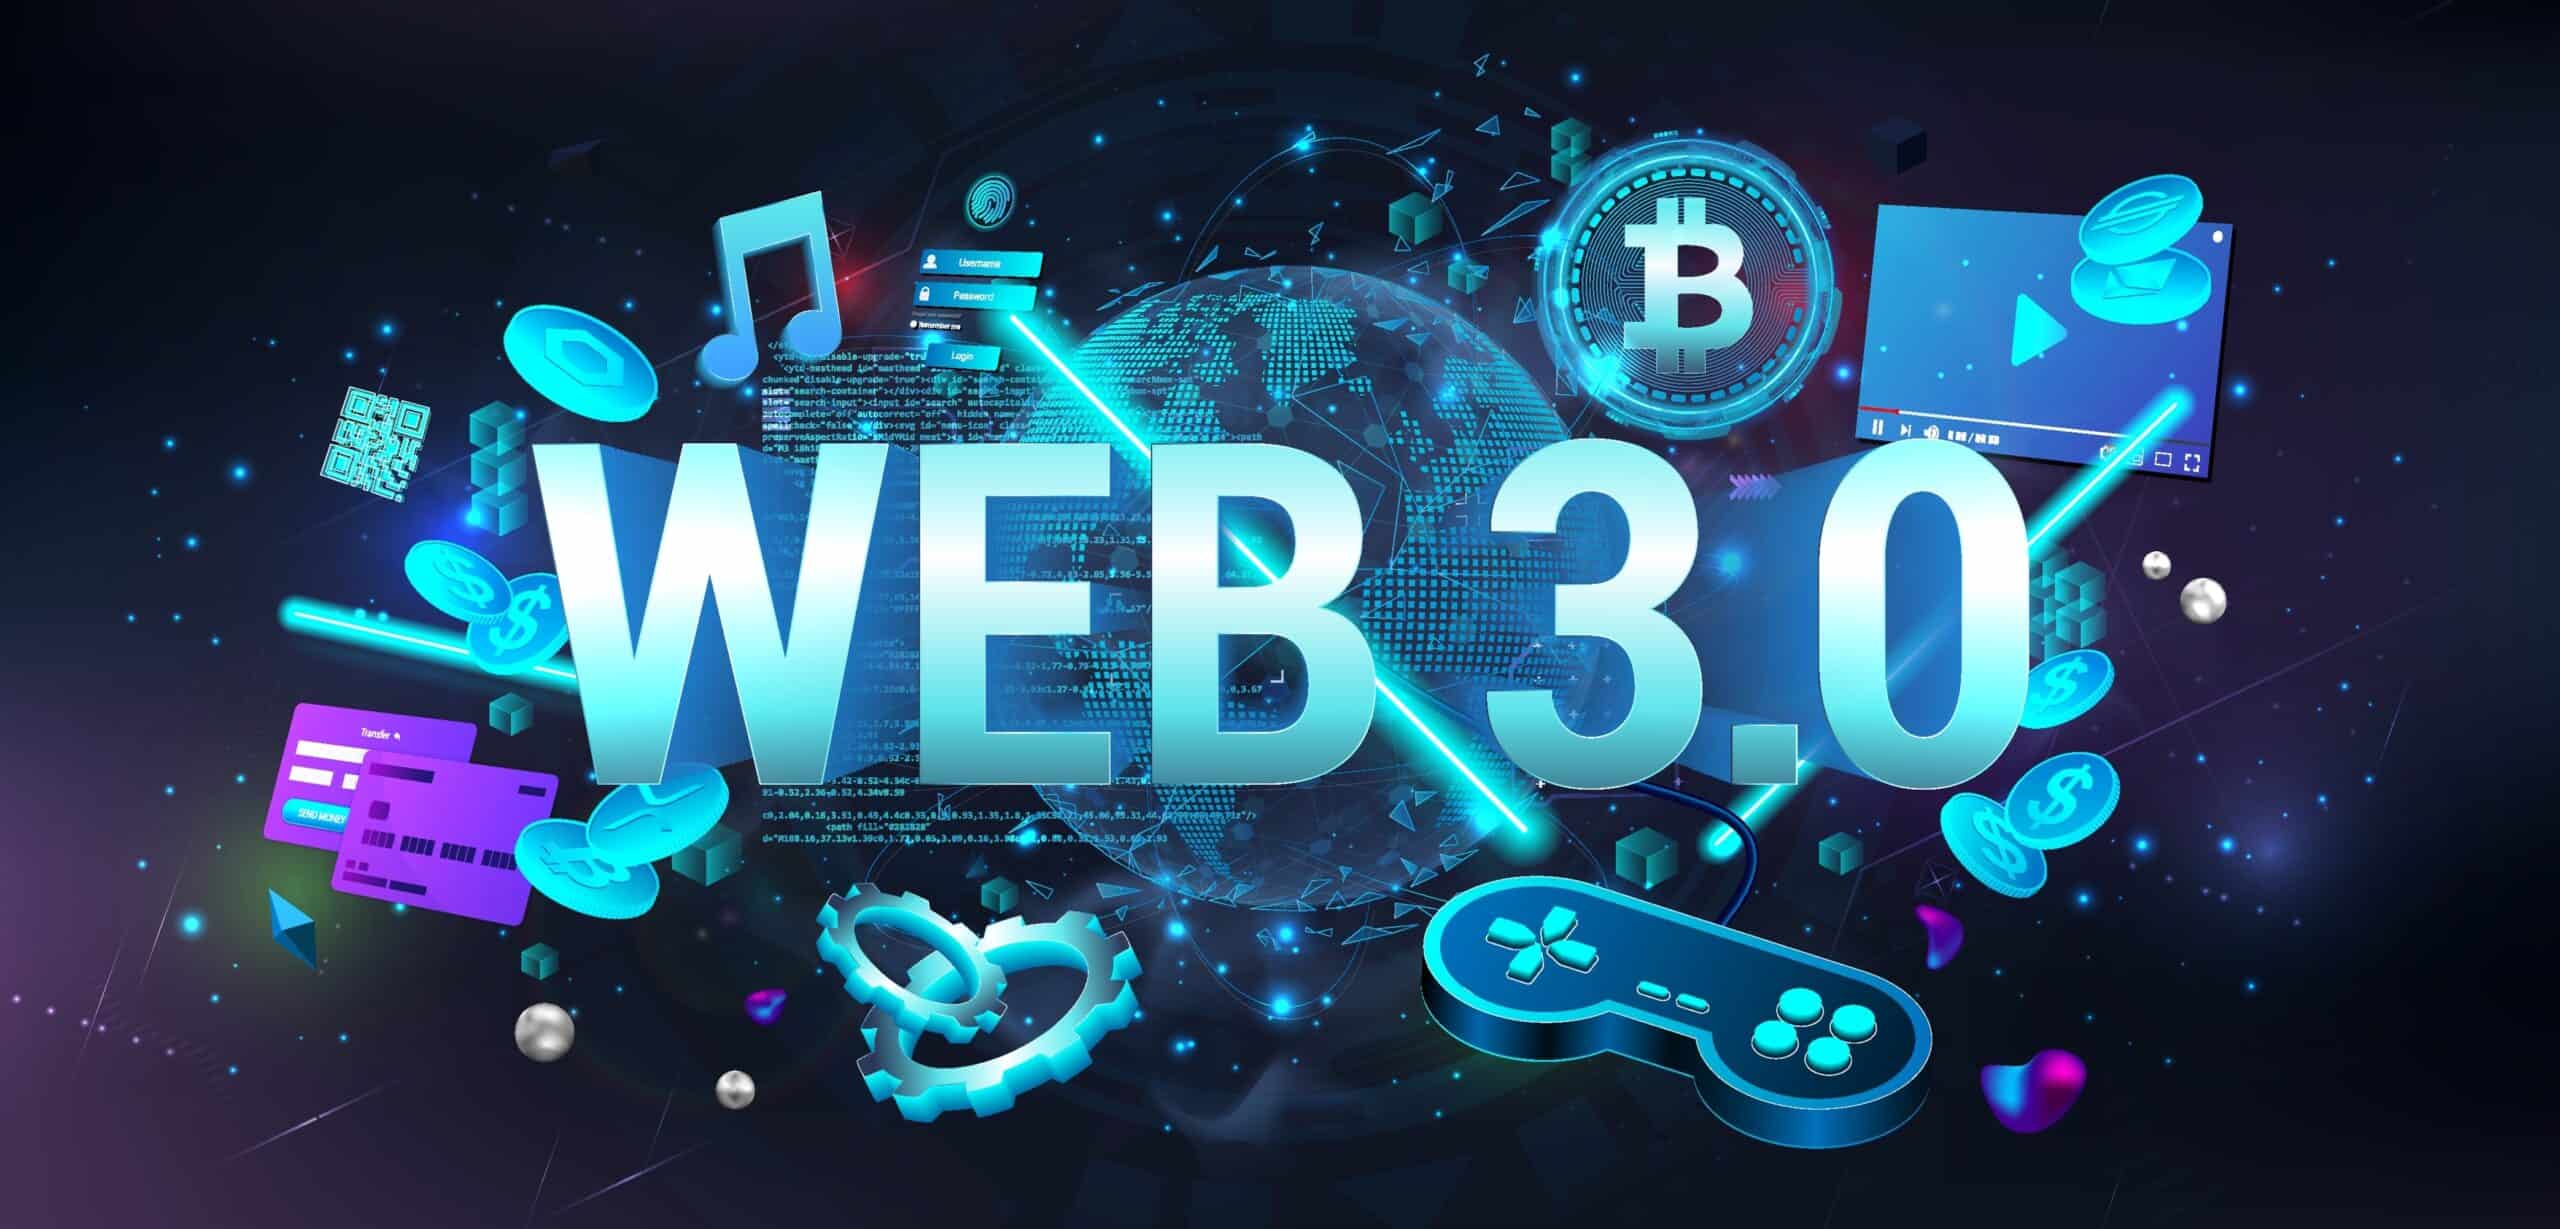 WEB 3.0, at the heart of the changes